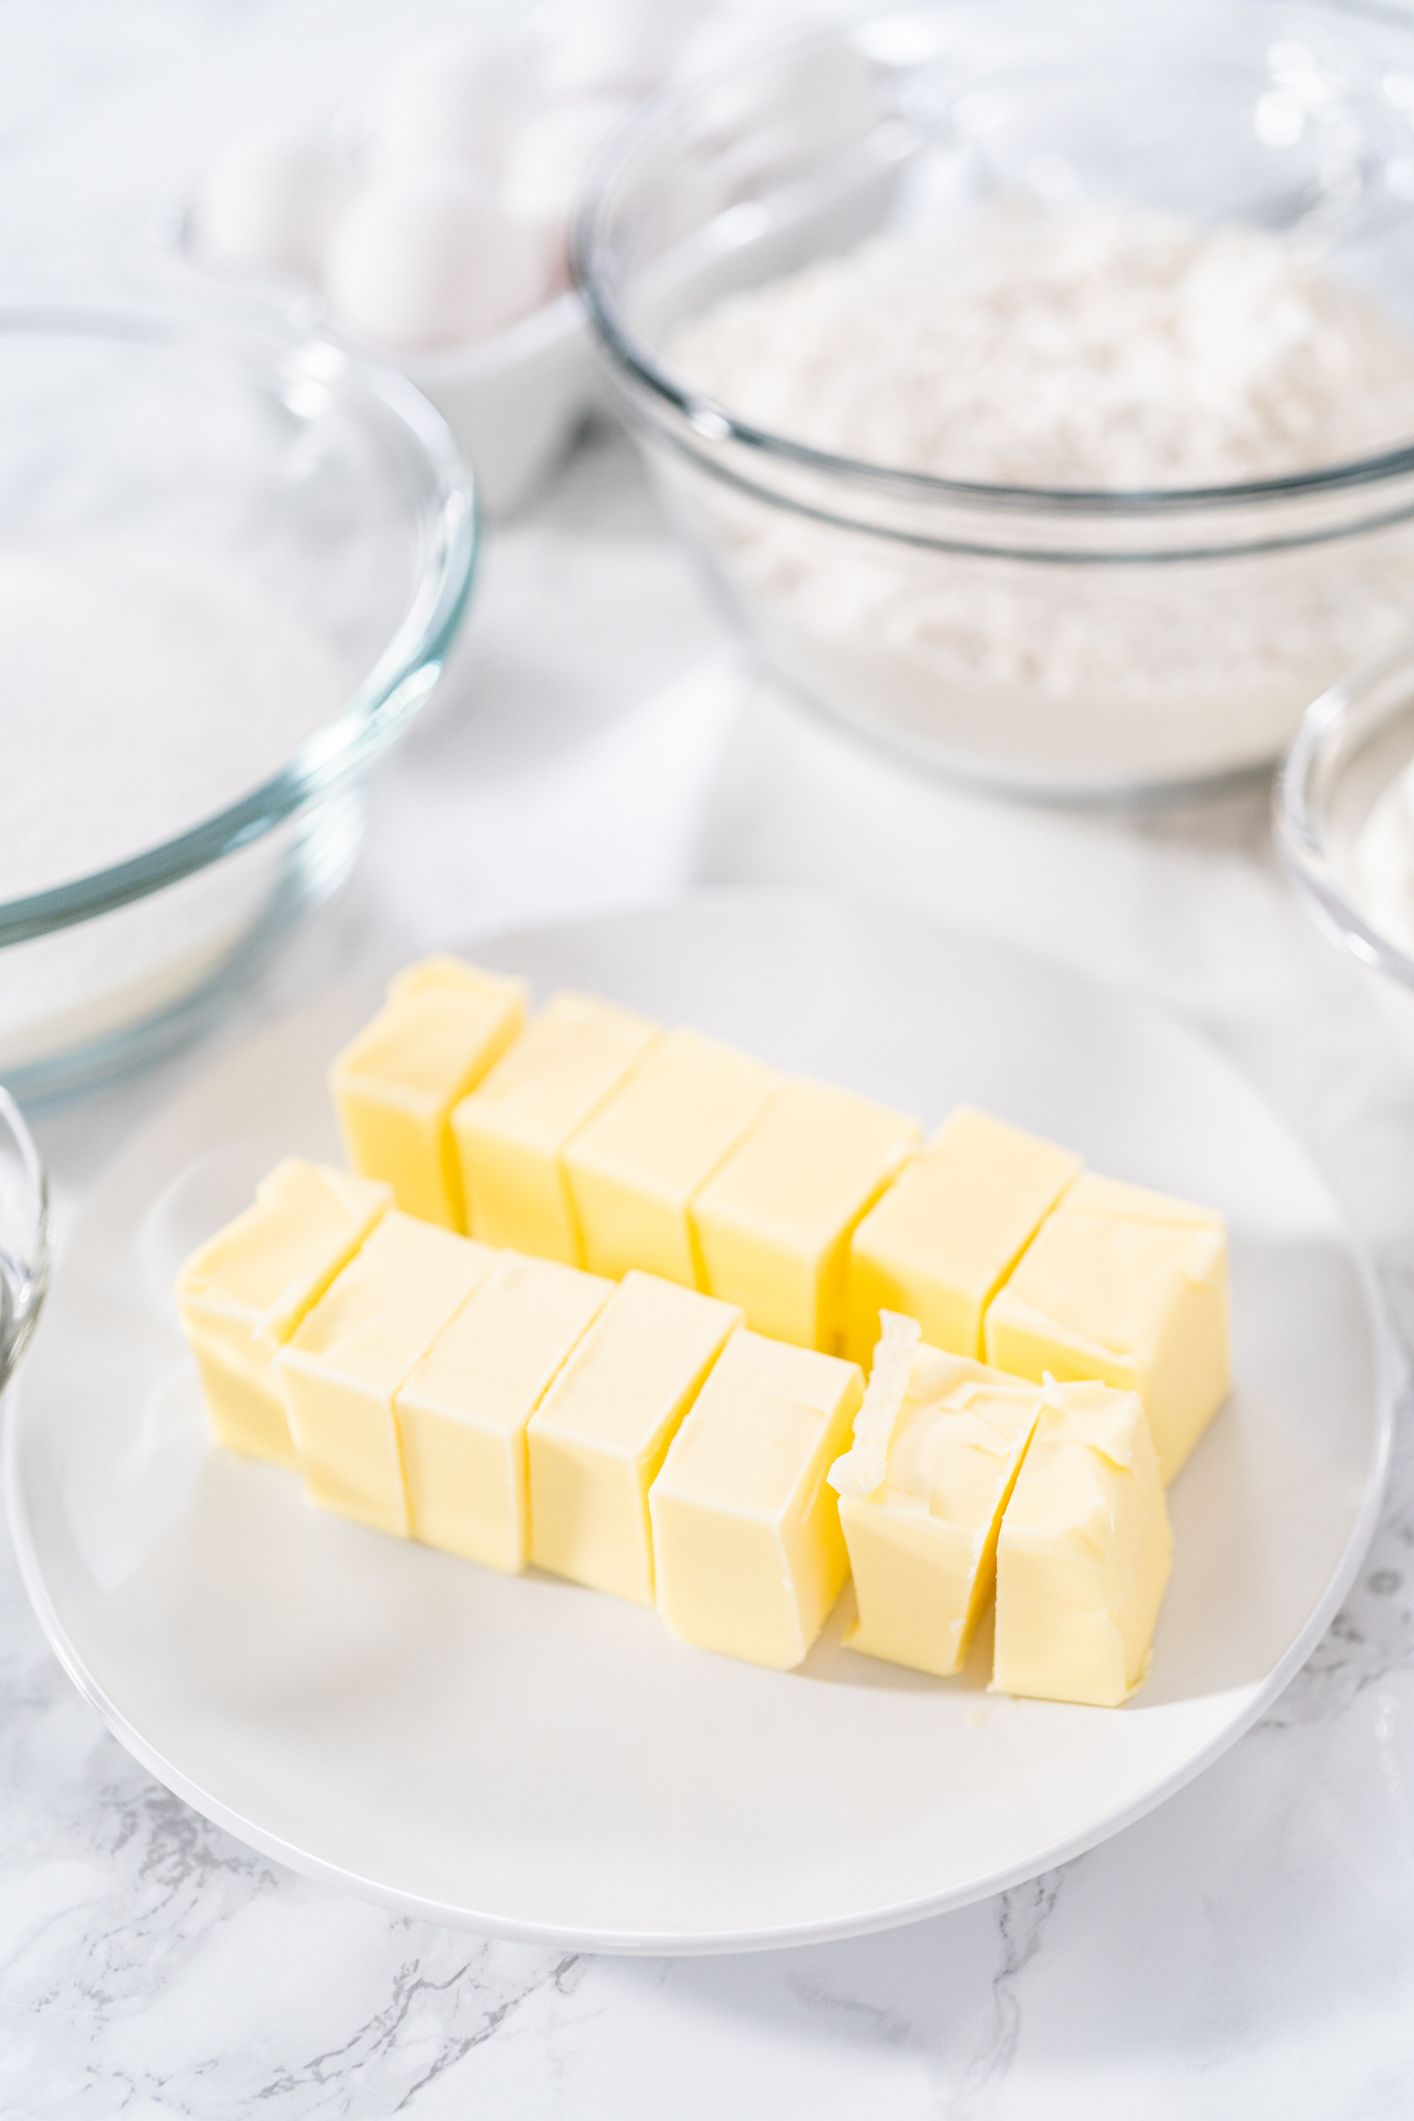 Unsalted or Salted Butter: Which is Better for Baking? - Bake or Break